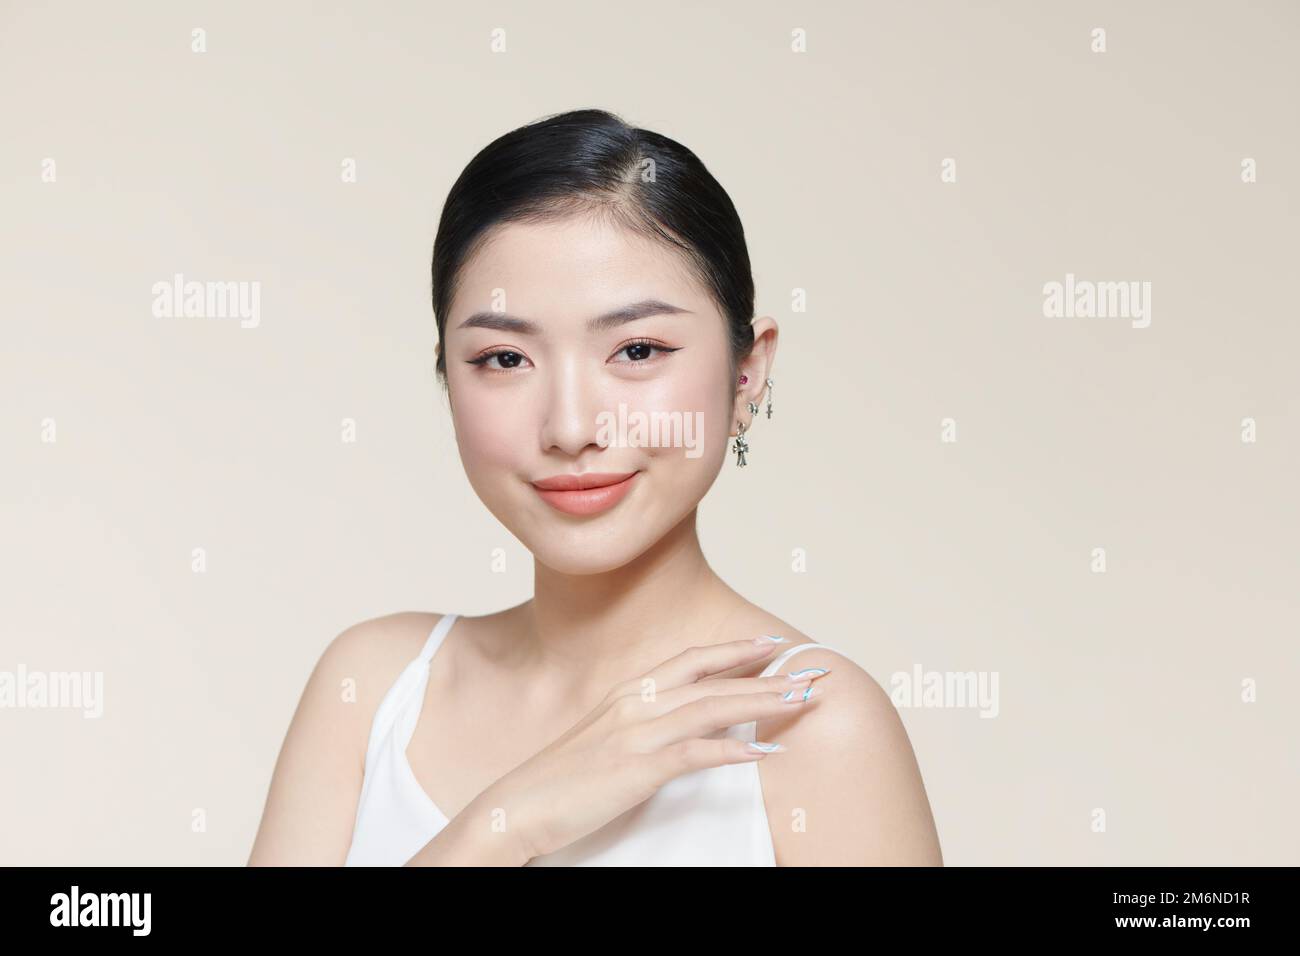 Beautiful young asian woman with clean fresh skin on white background, Stock Photo